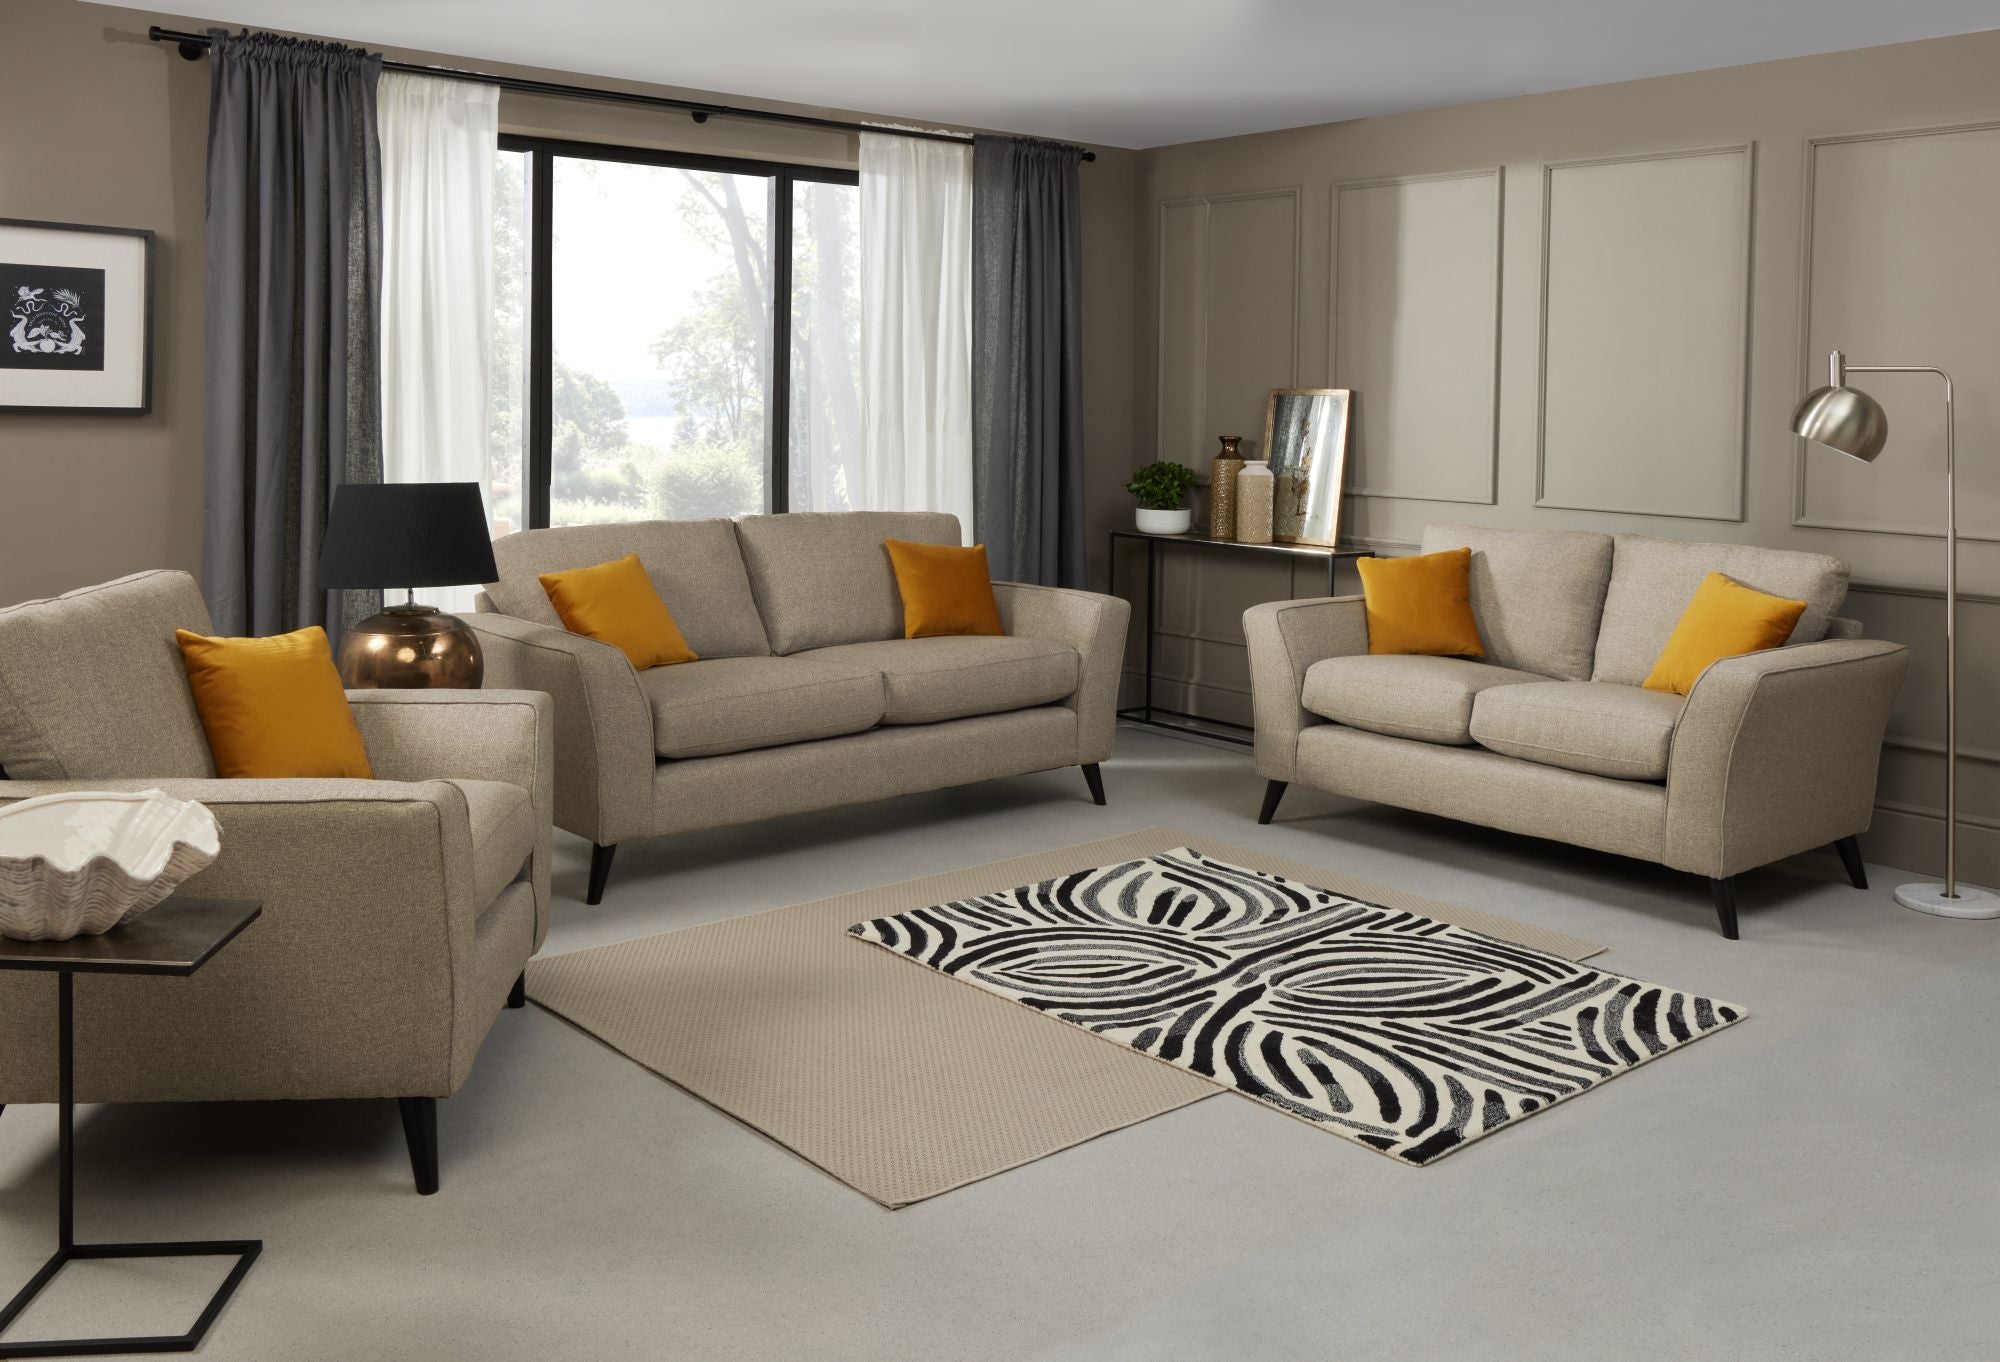 libby 3 seater, 2 seater and armchair in Oatmeal shown in a room setting